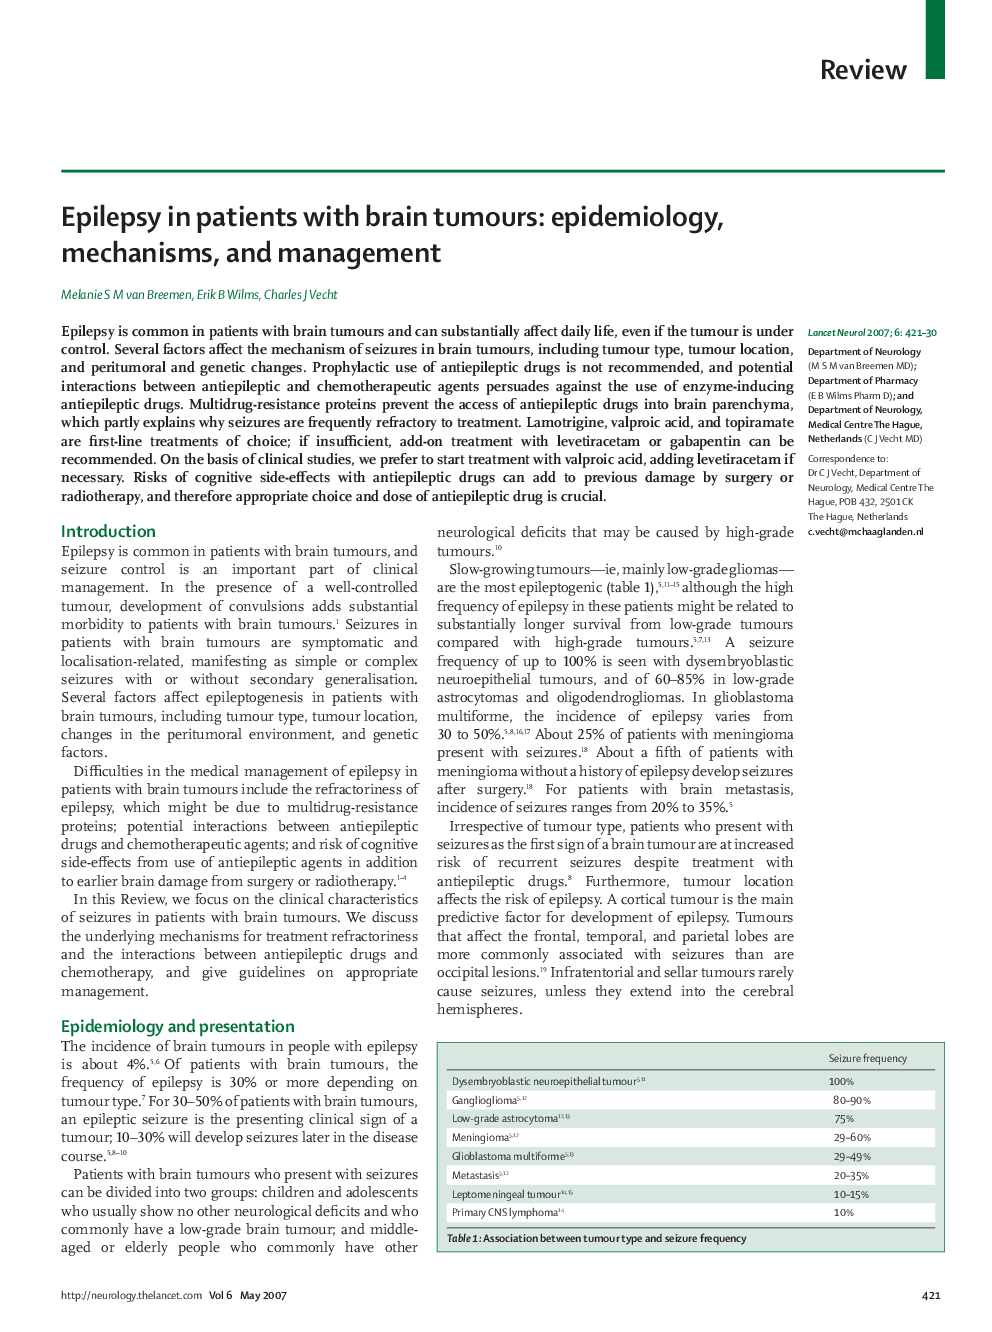 Epilepsy in patients with brain tumours: epidemiology, mechanisms, and management